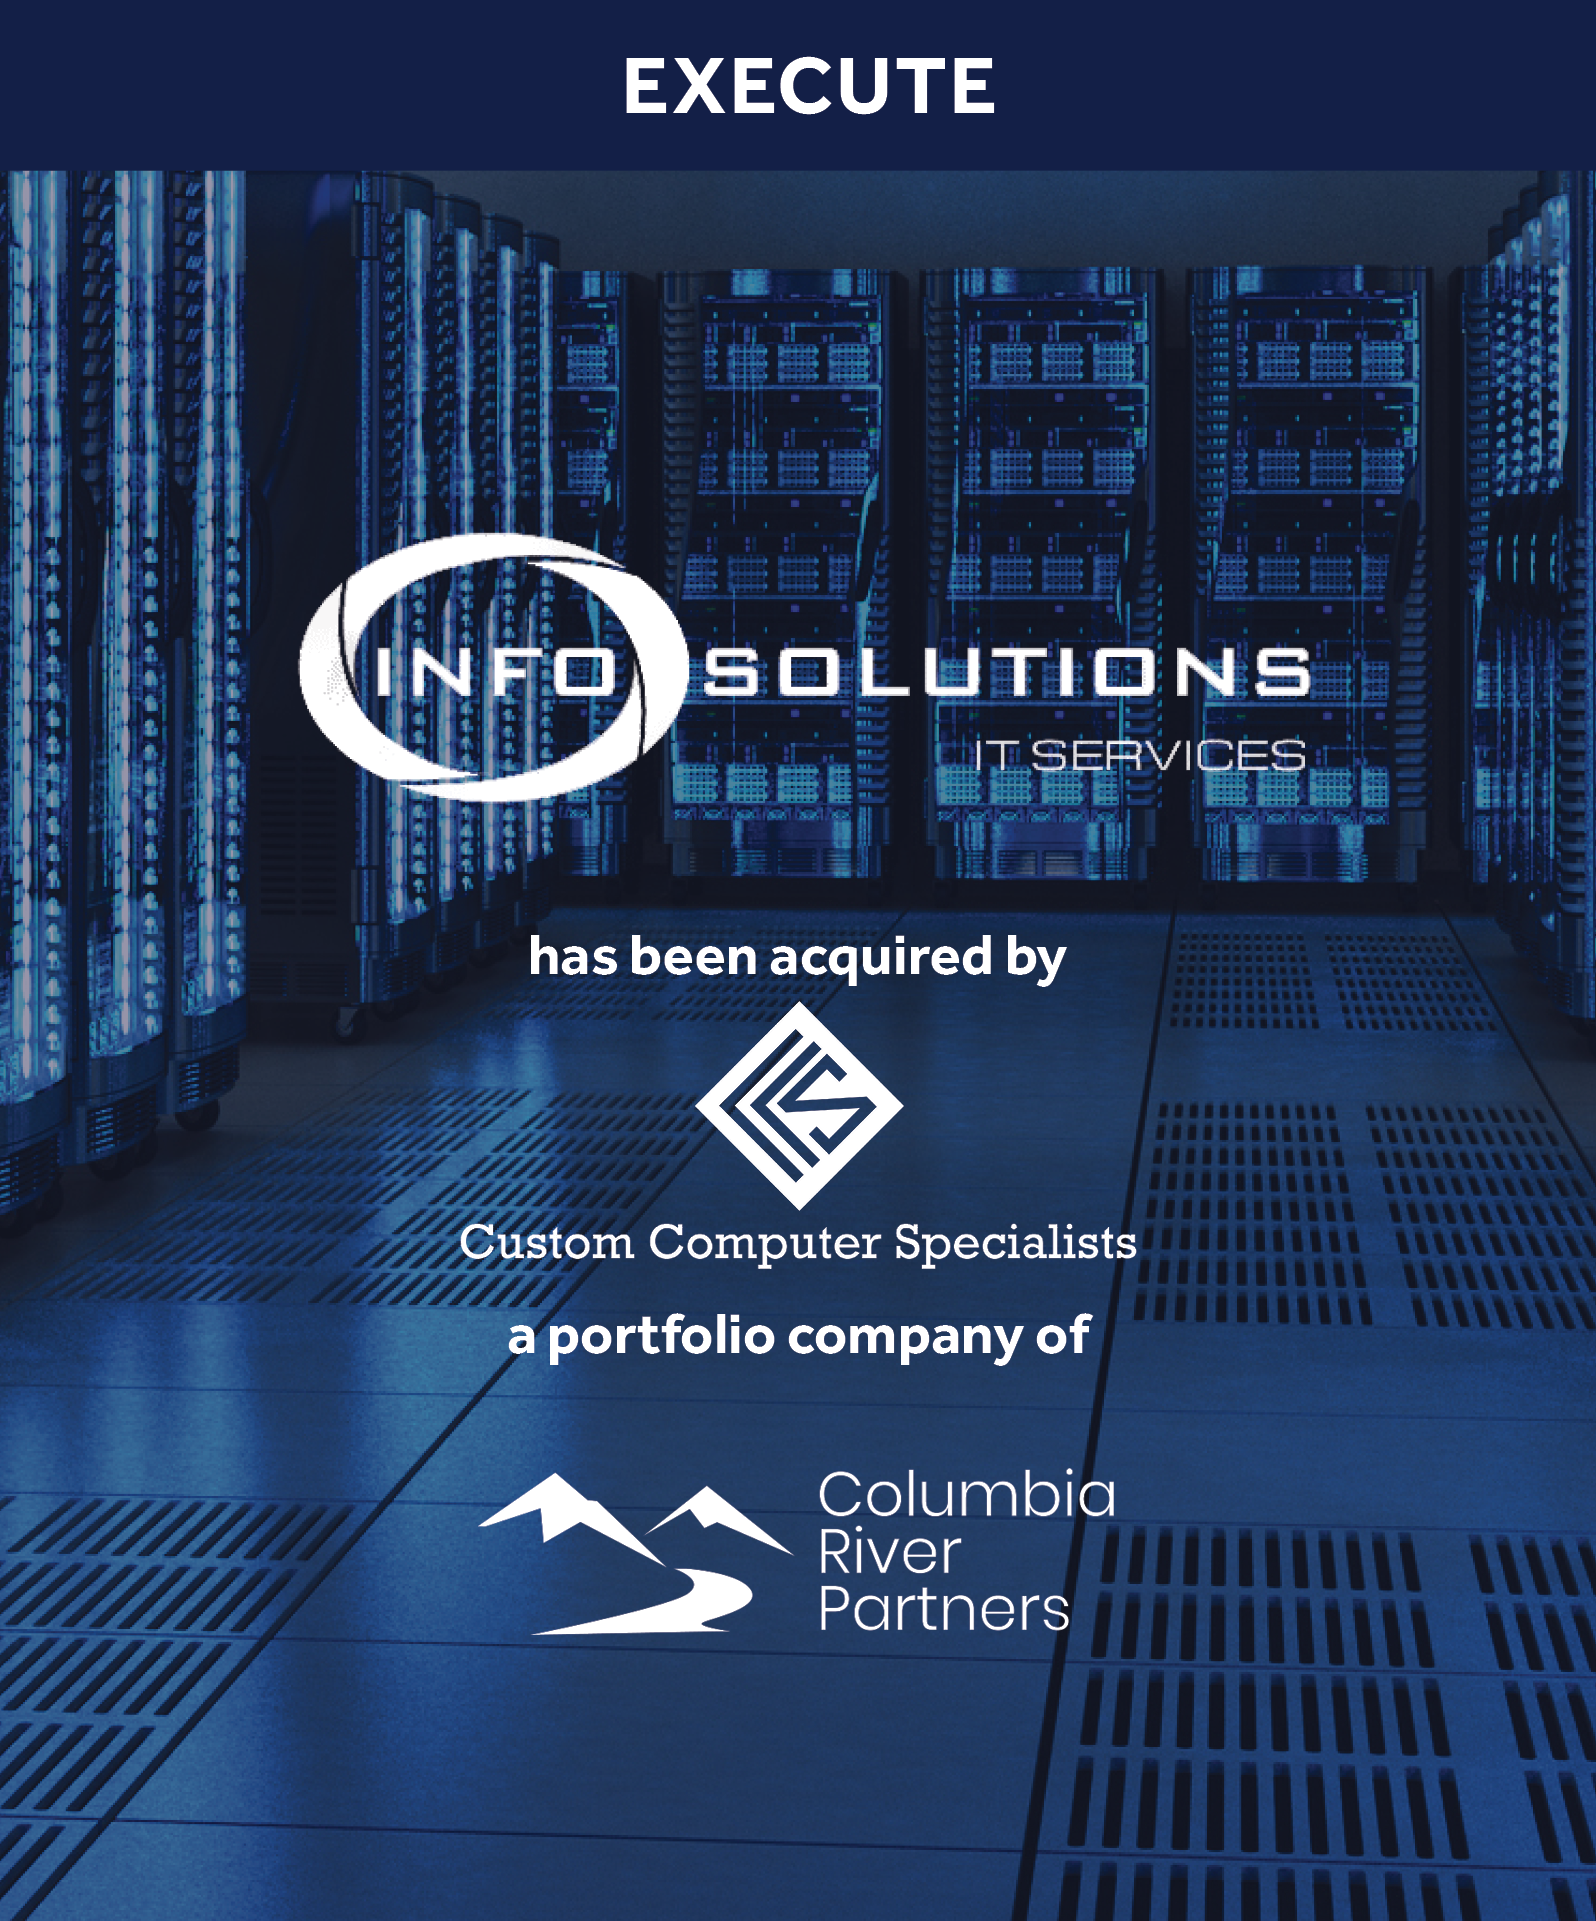 server room with transaction details and execute banner- Info Solutions LLC is acquired by Custom Computer Specialists